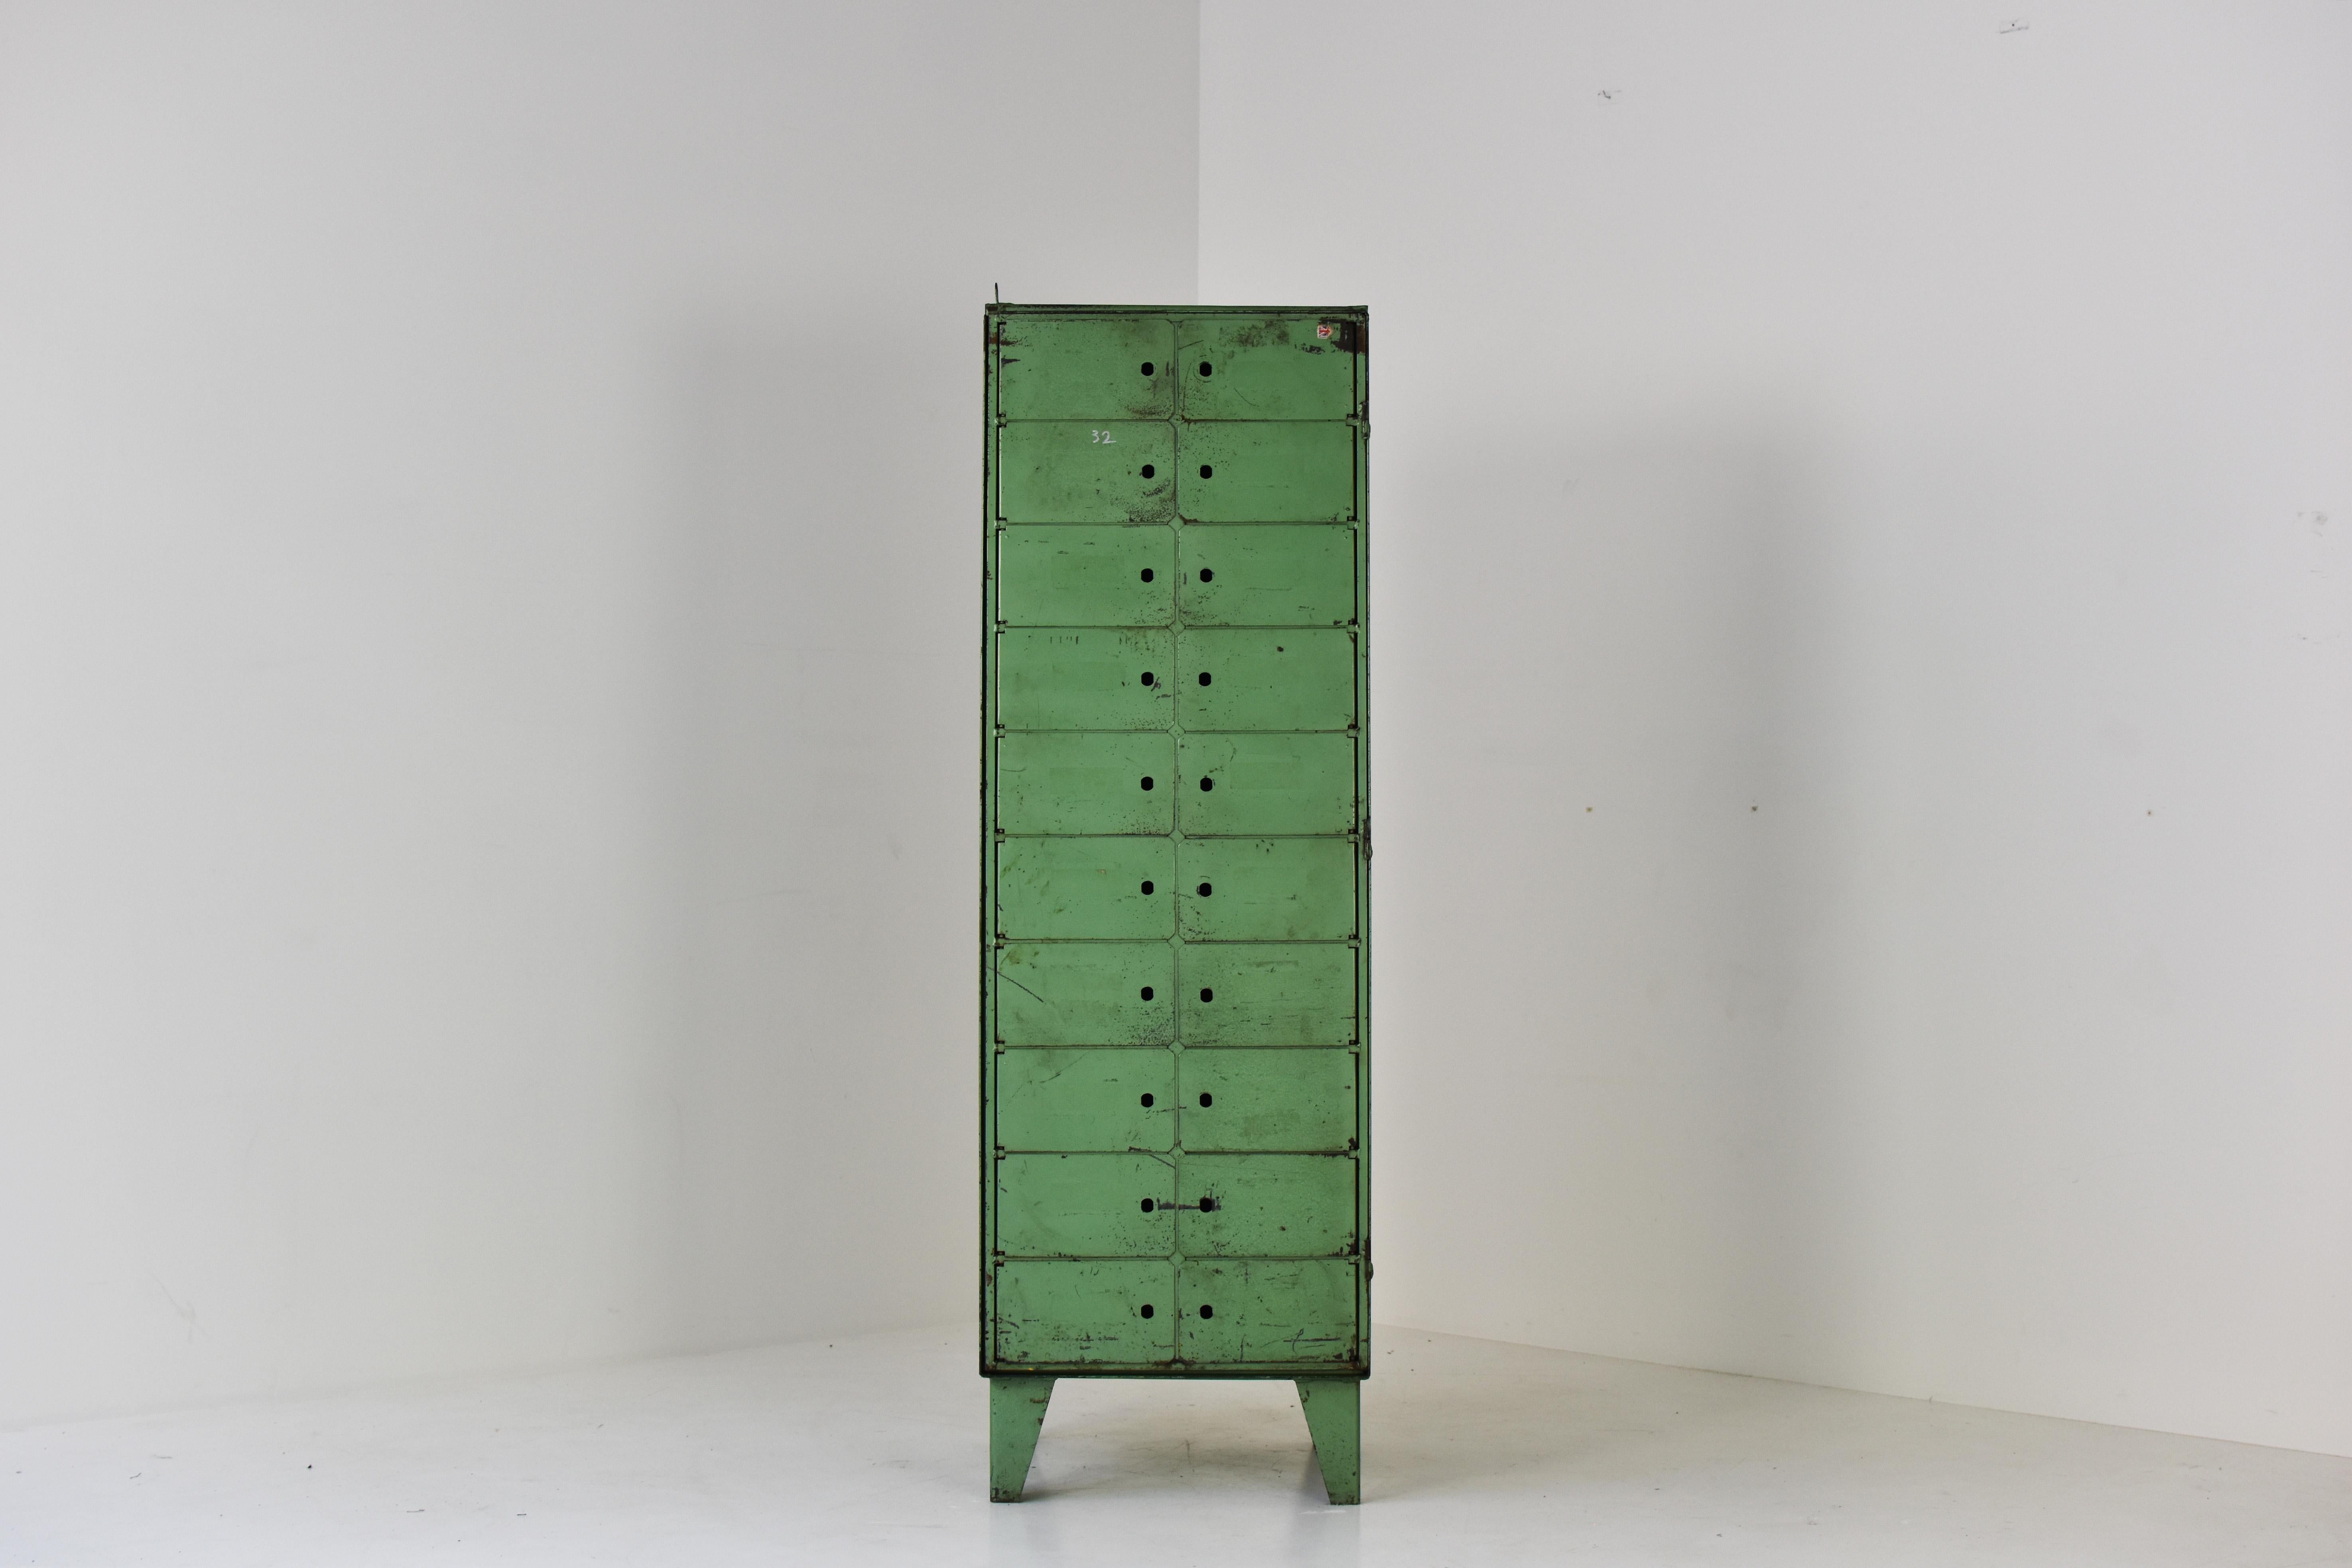 Industrial vitrine cabinet dating from the 1930s, probably from the U.K. This locker has multiple little doors to individually open the storage area behind, or one central door for open them all. Lovely green lacquer which has been aged beautifully.